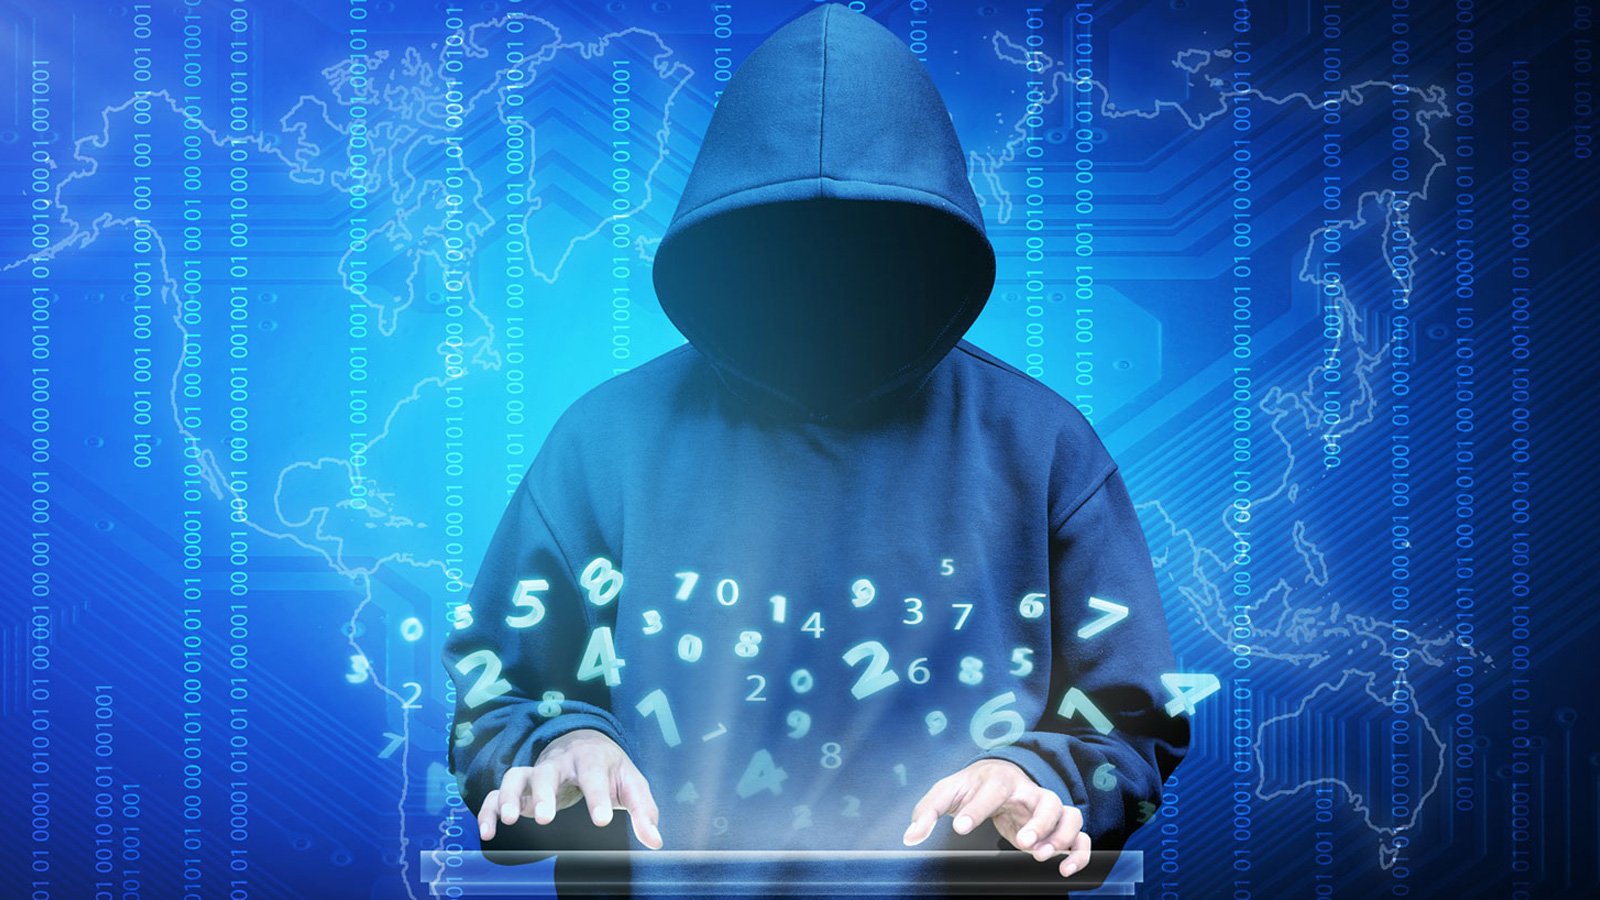 Domain shadowing becoming more popular among cybercriminals